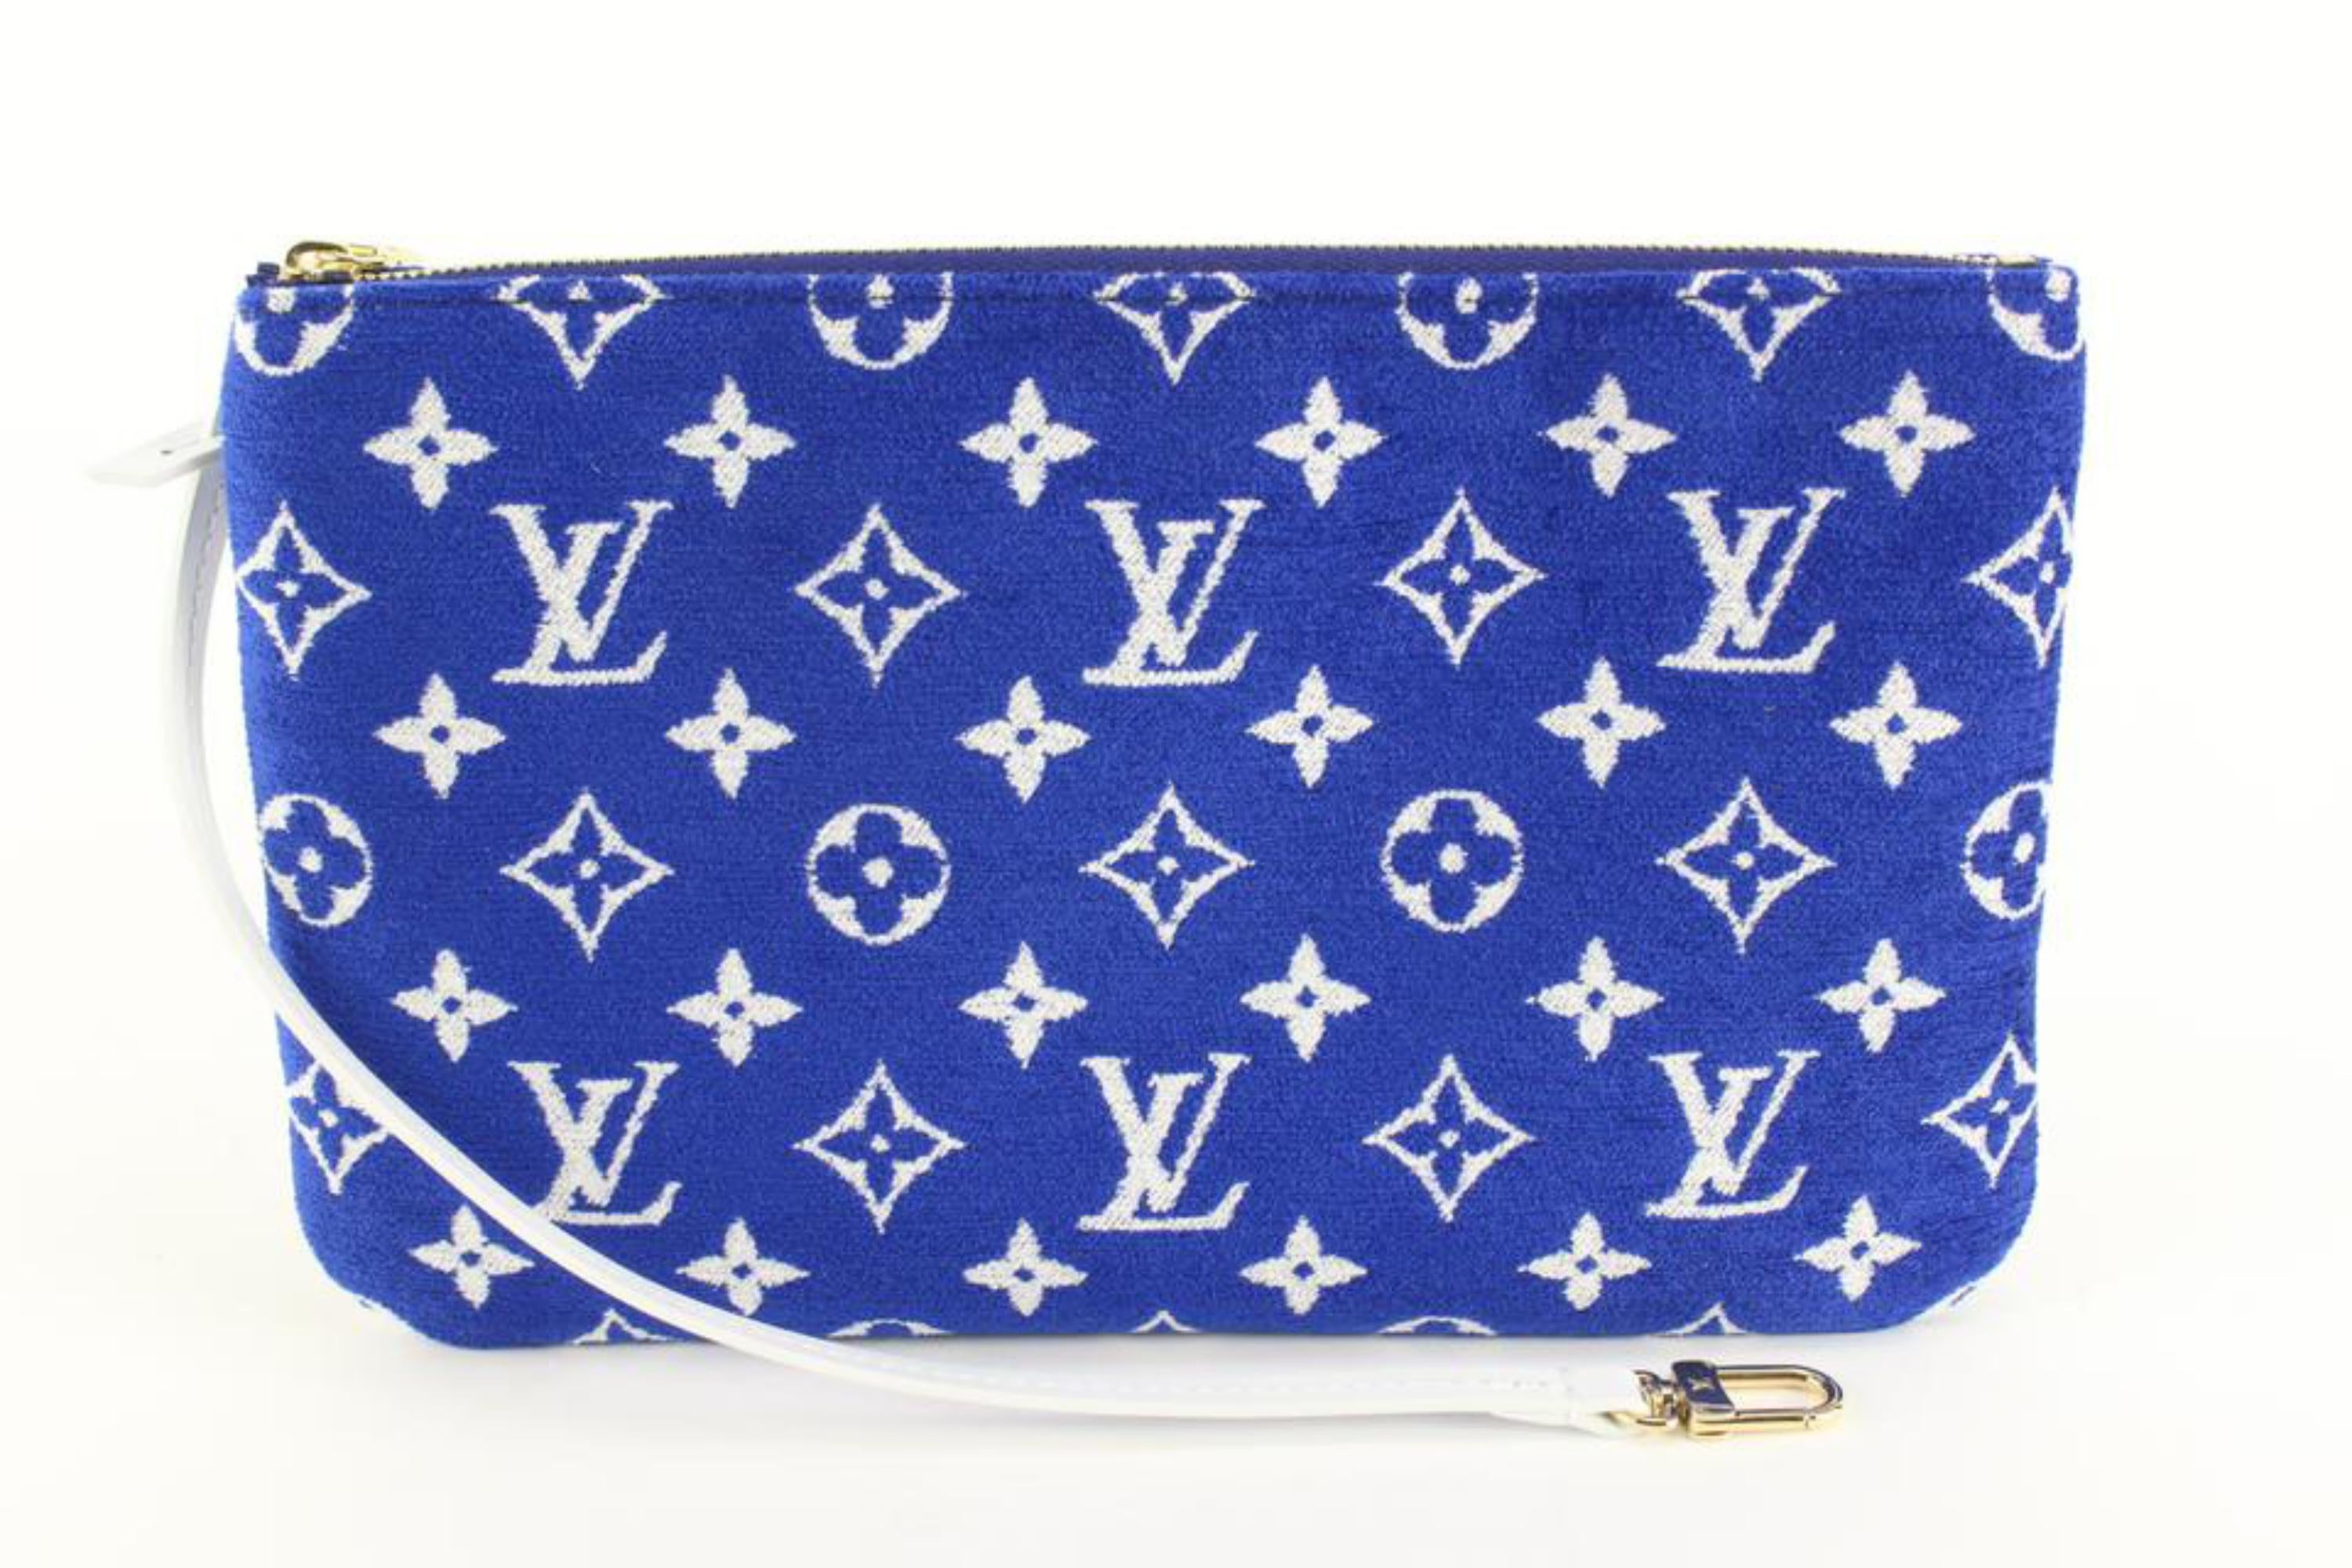 vuitton blue and white